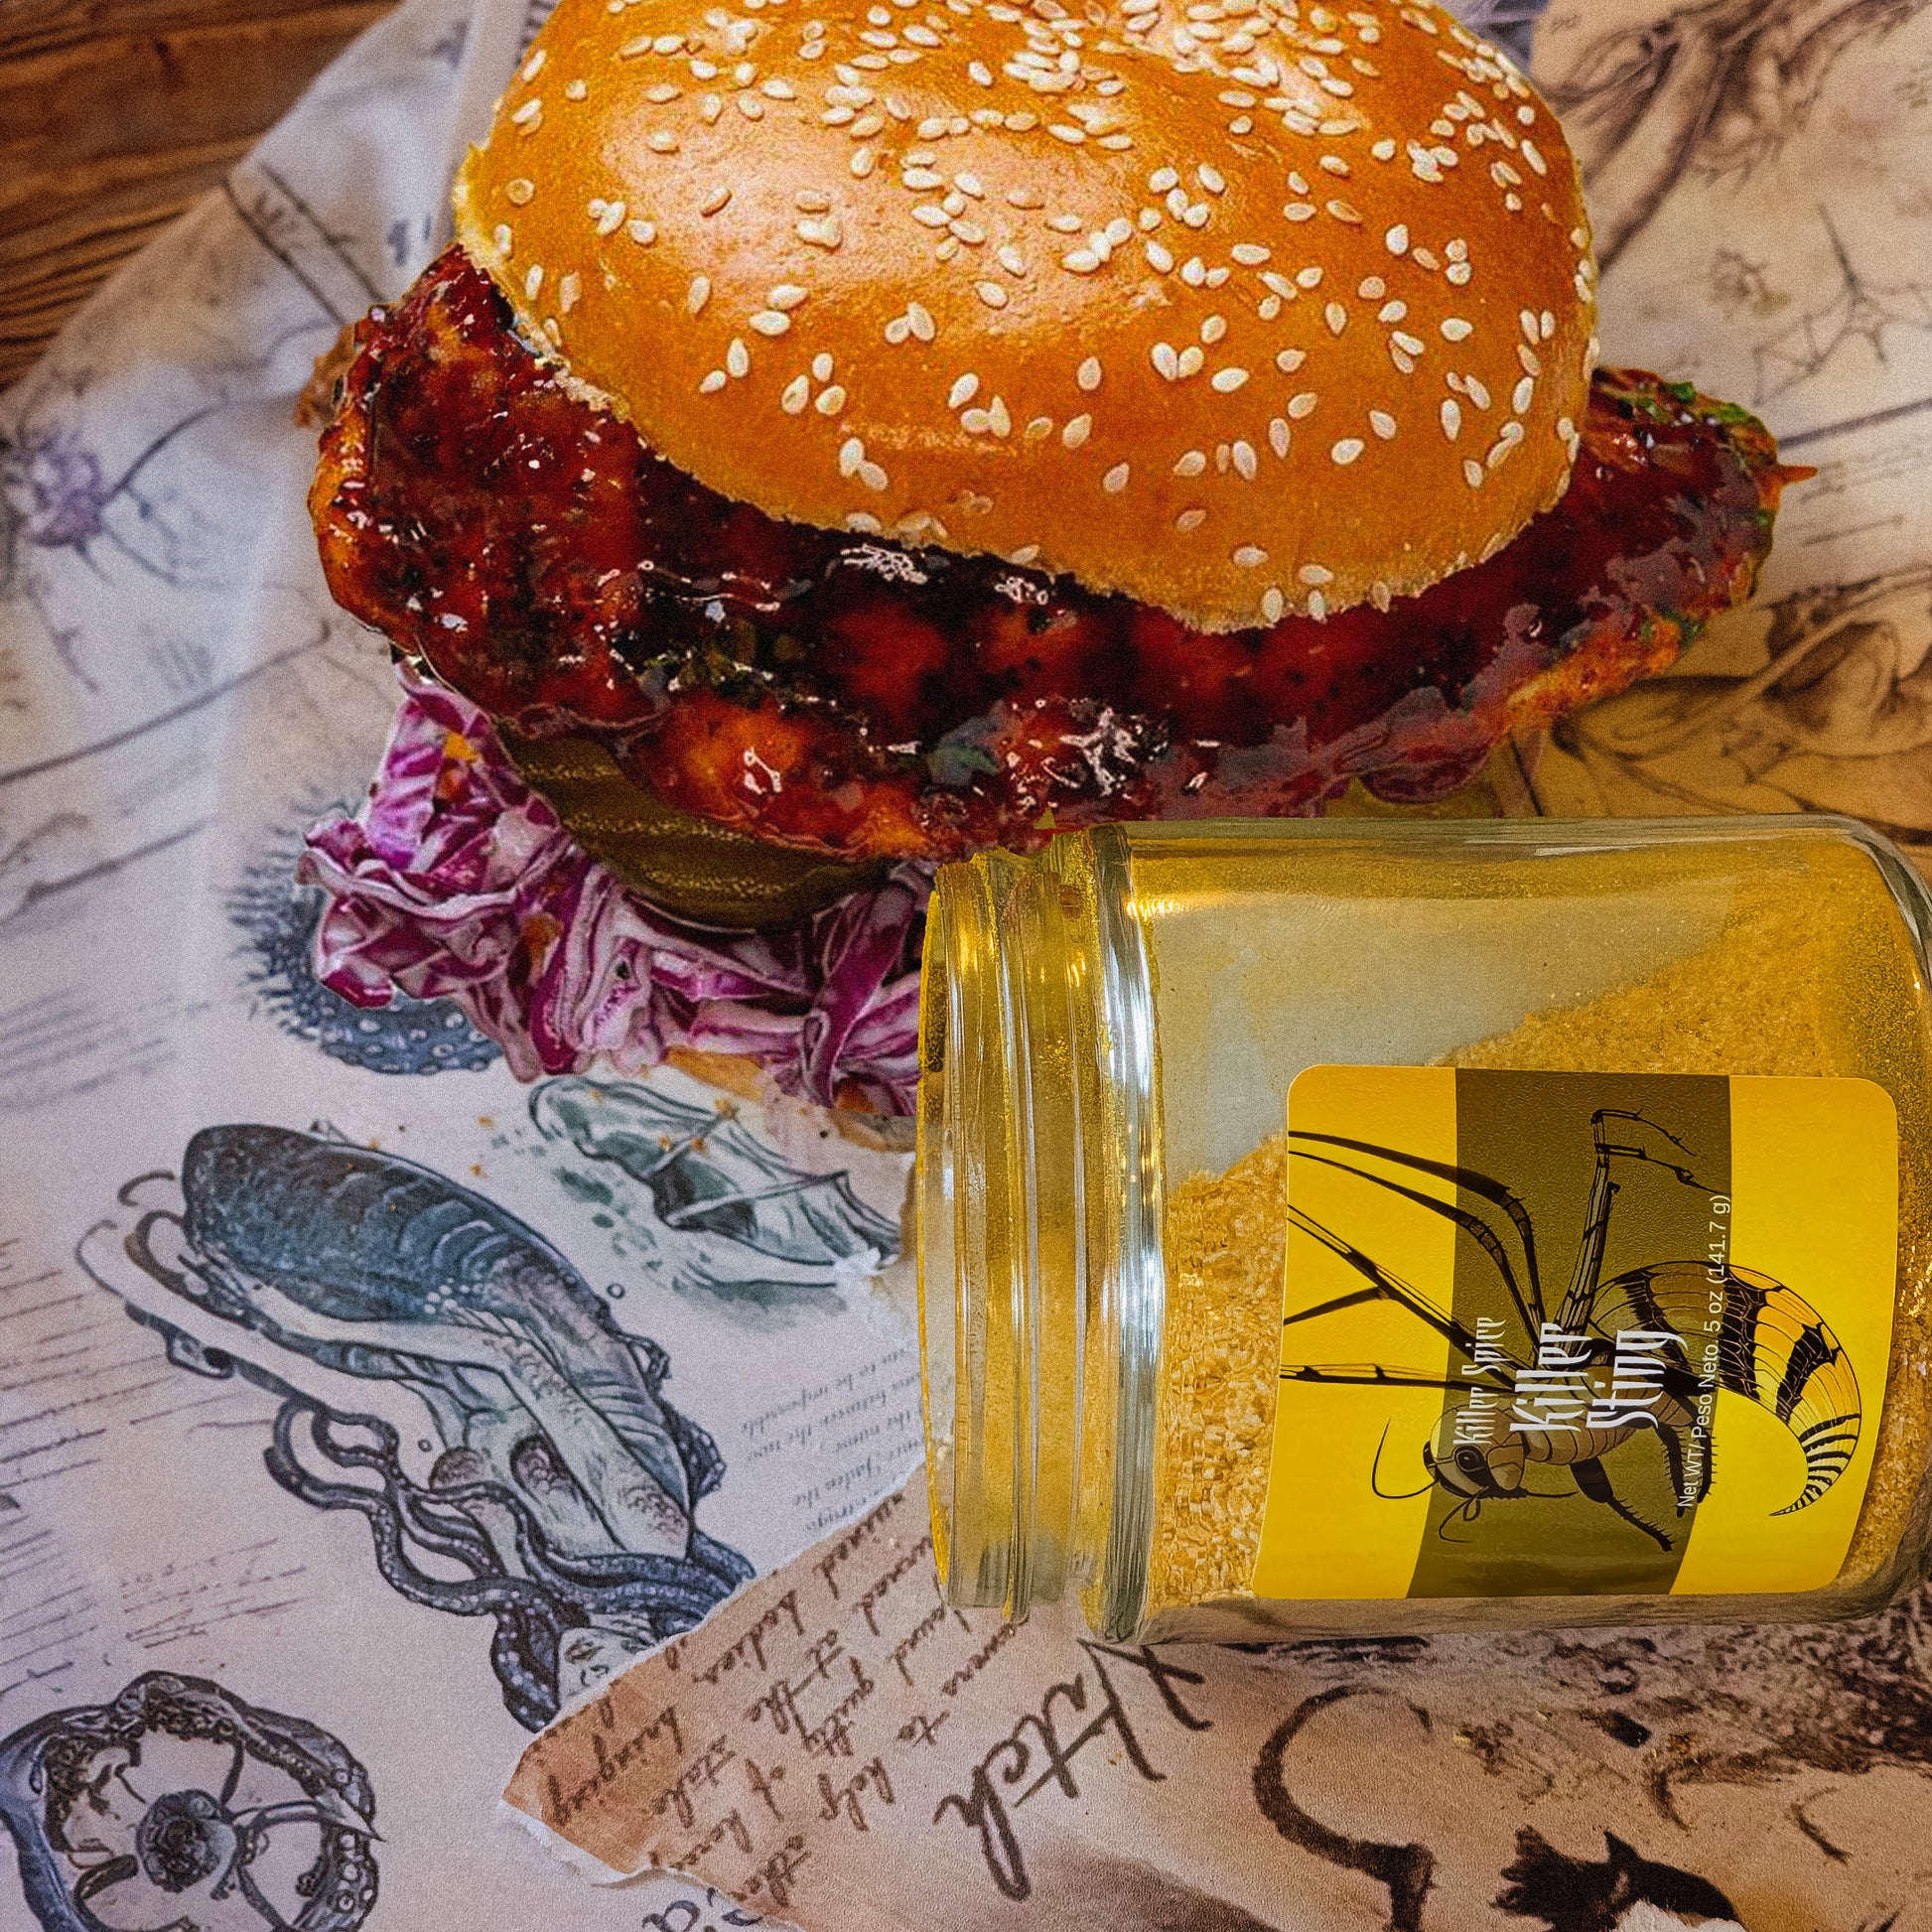 A jar of Killer Sting honey from Killer Spice positioned next to a chicken sandwich with coleslaw and cayenne pepper on a table with patterned tablecloth.